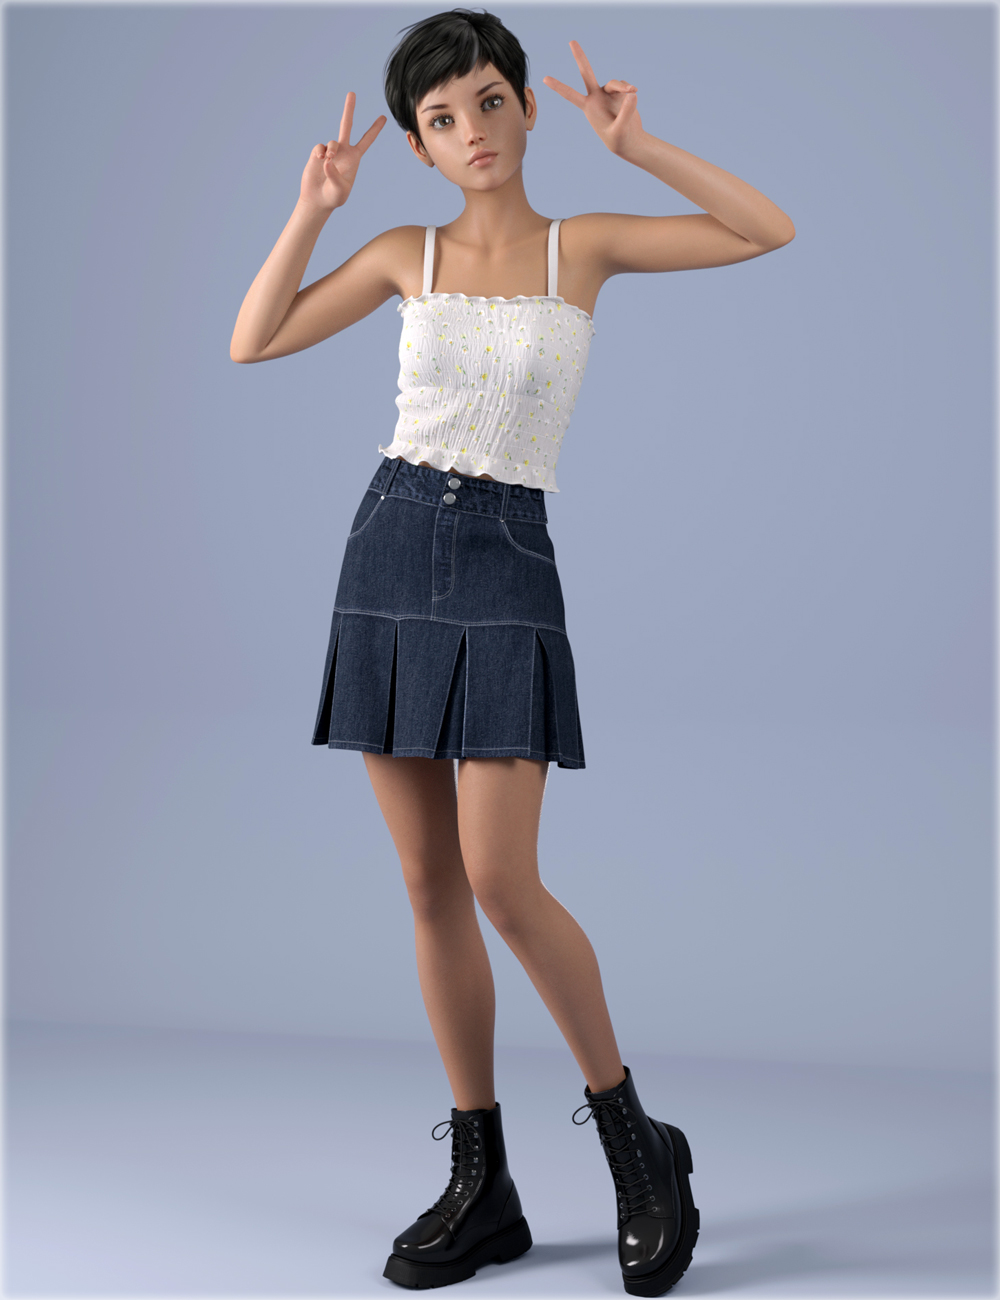 dForce HnC Pleated Denim Skirt Outfit for Genesis 8.1 Females by: IH Kang, 3D Models by Daz 3D